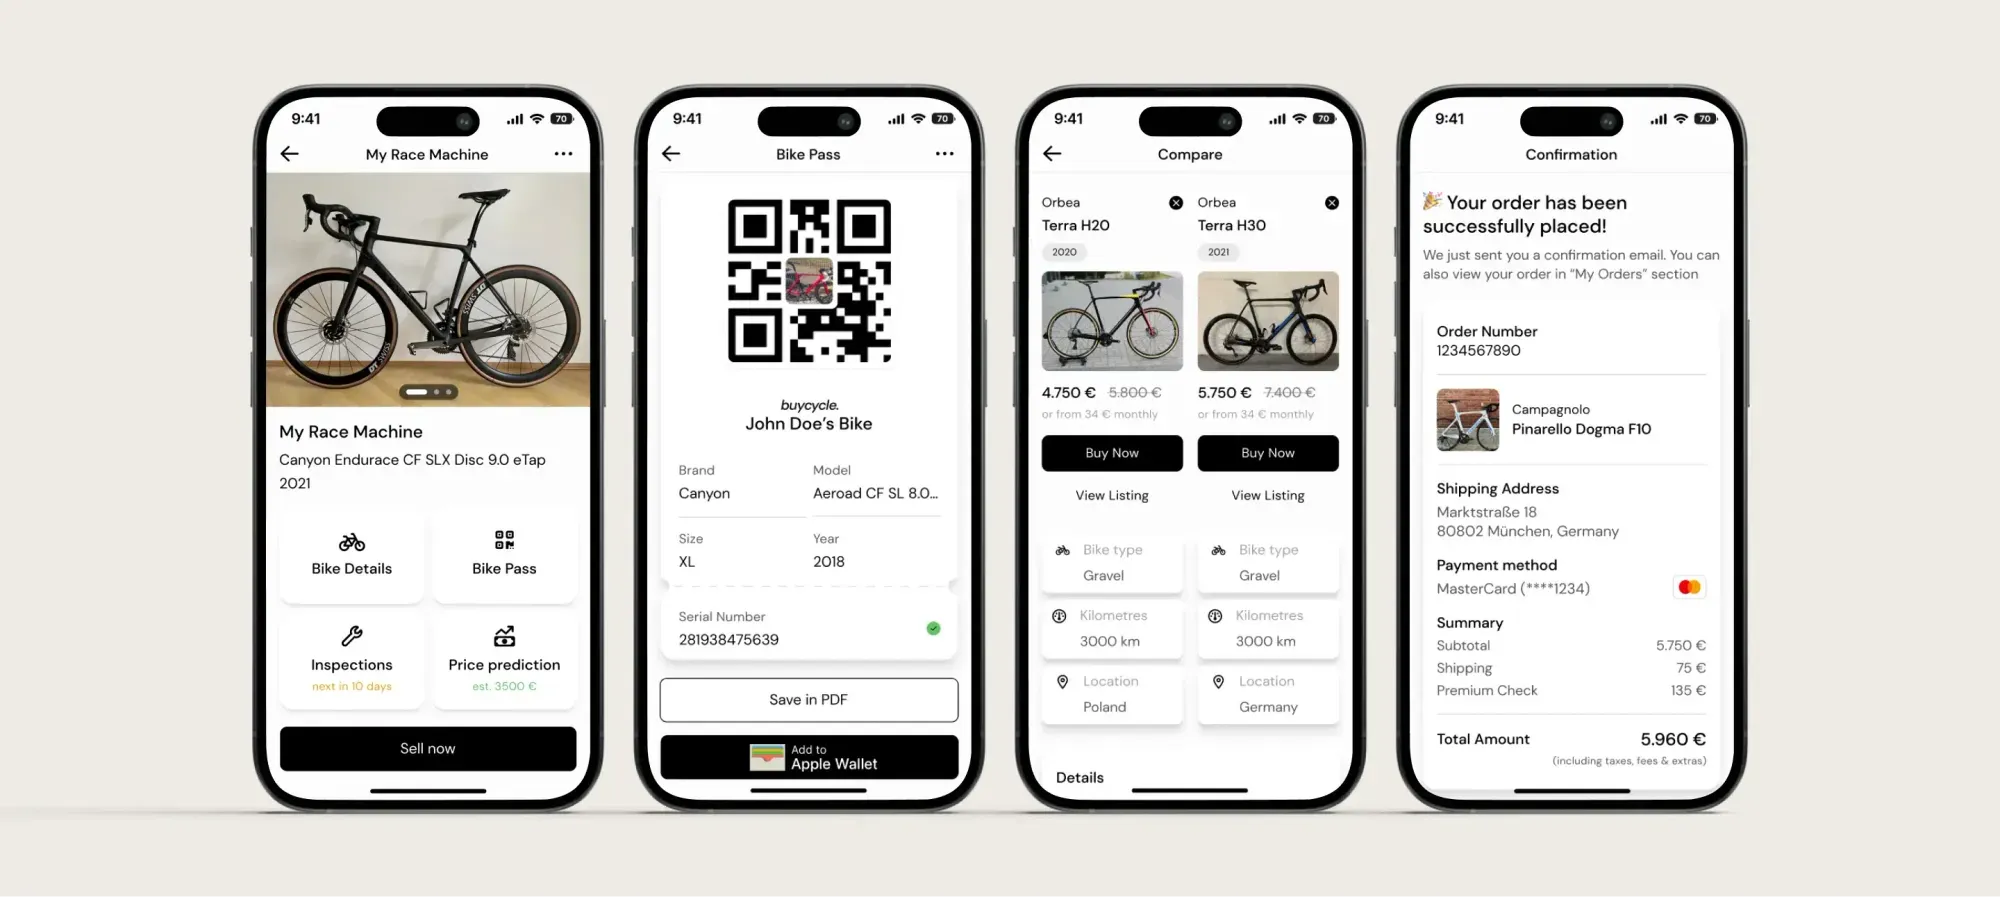 The buycycle mobile app